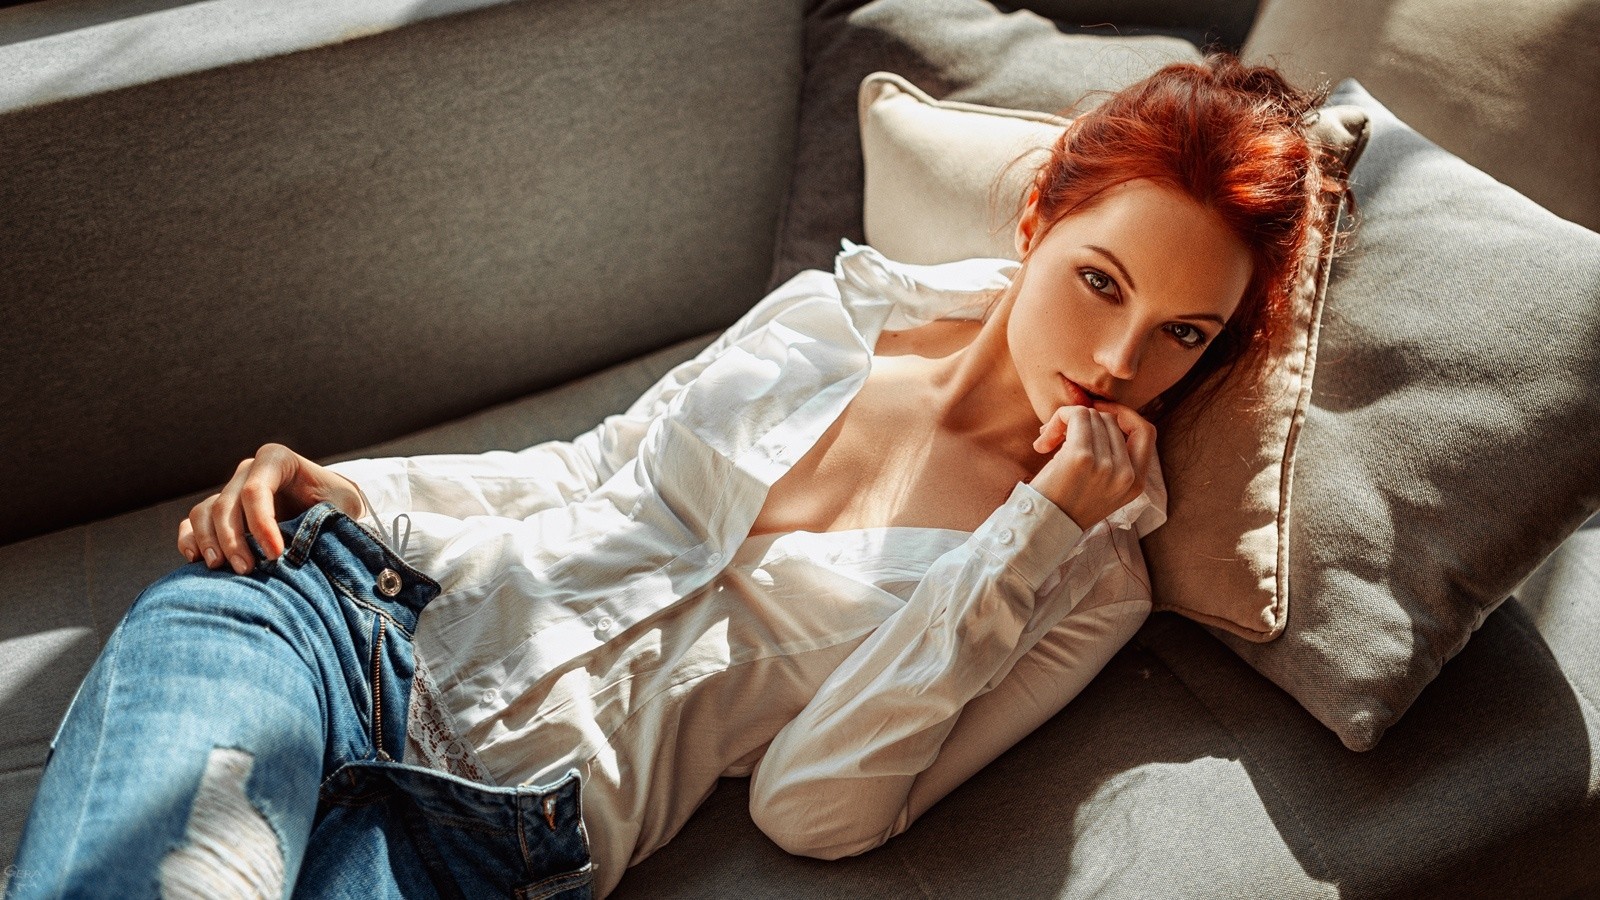 People 1600x900 Georgy Chernyadyev women model open shirt redhead torn jeans lying down no bra panties cleavage portrait finger in mouth Alina Bagrets women indoors indoors makeup dyed hair looking at viewer